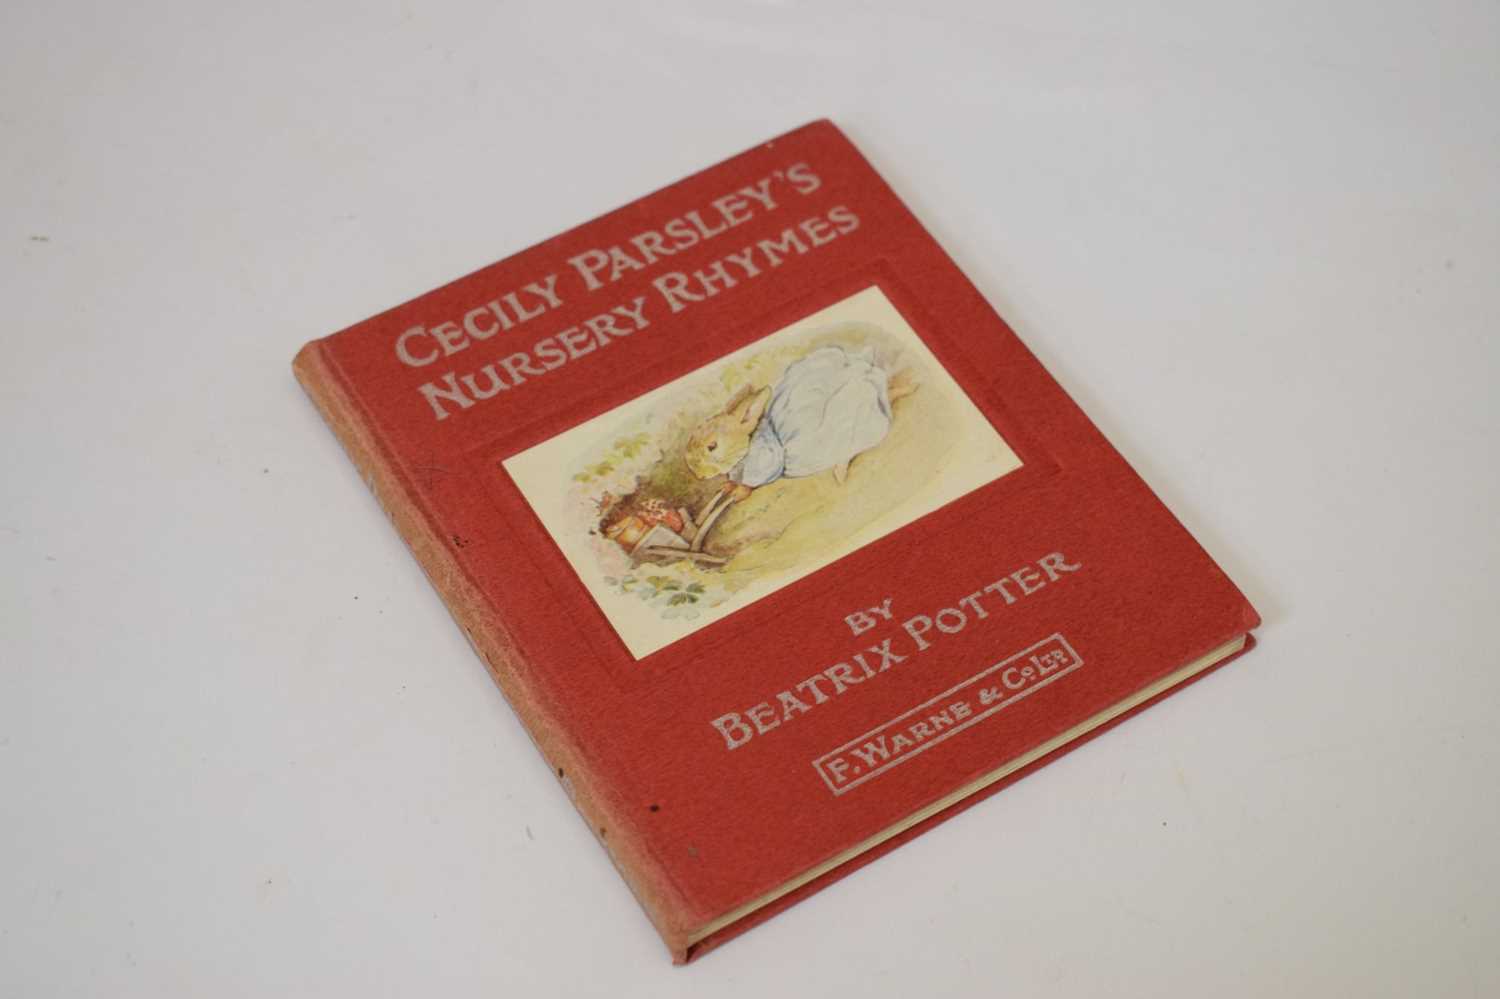 Potter, Beatrix - 'Cecily Parsley's Nursery Rhymes' - First edition - Image 3 of 37